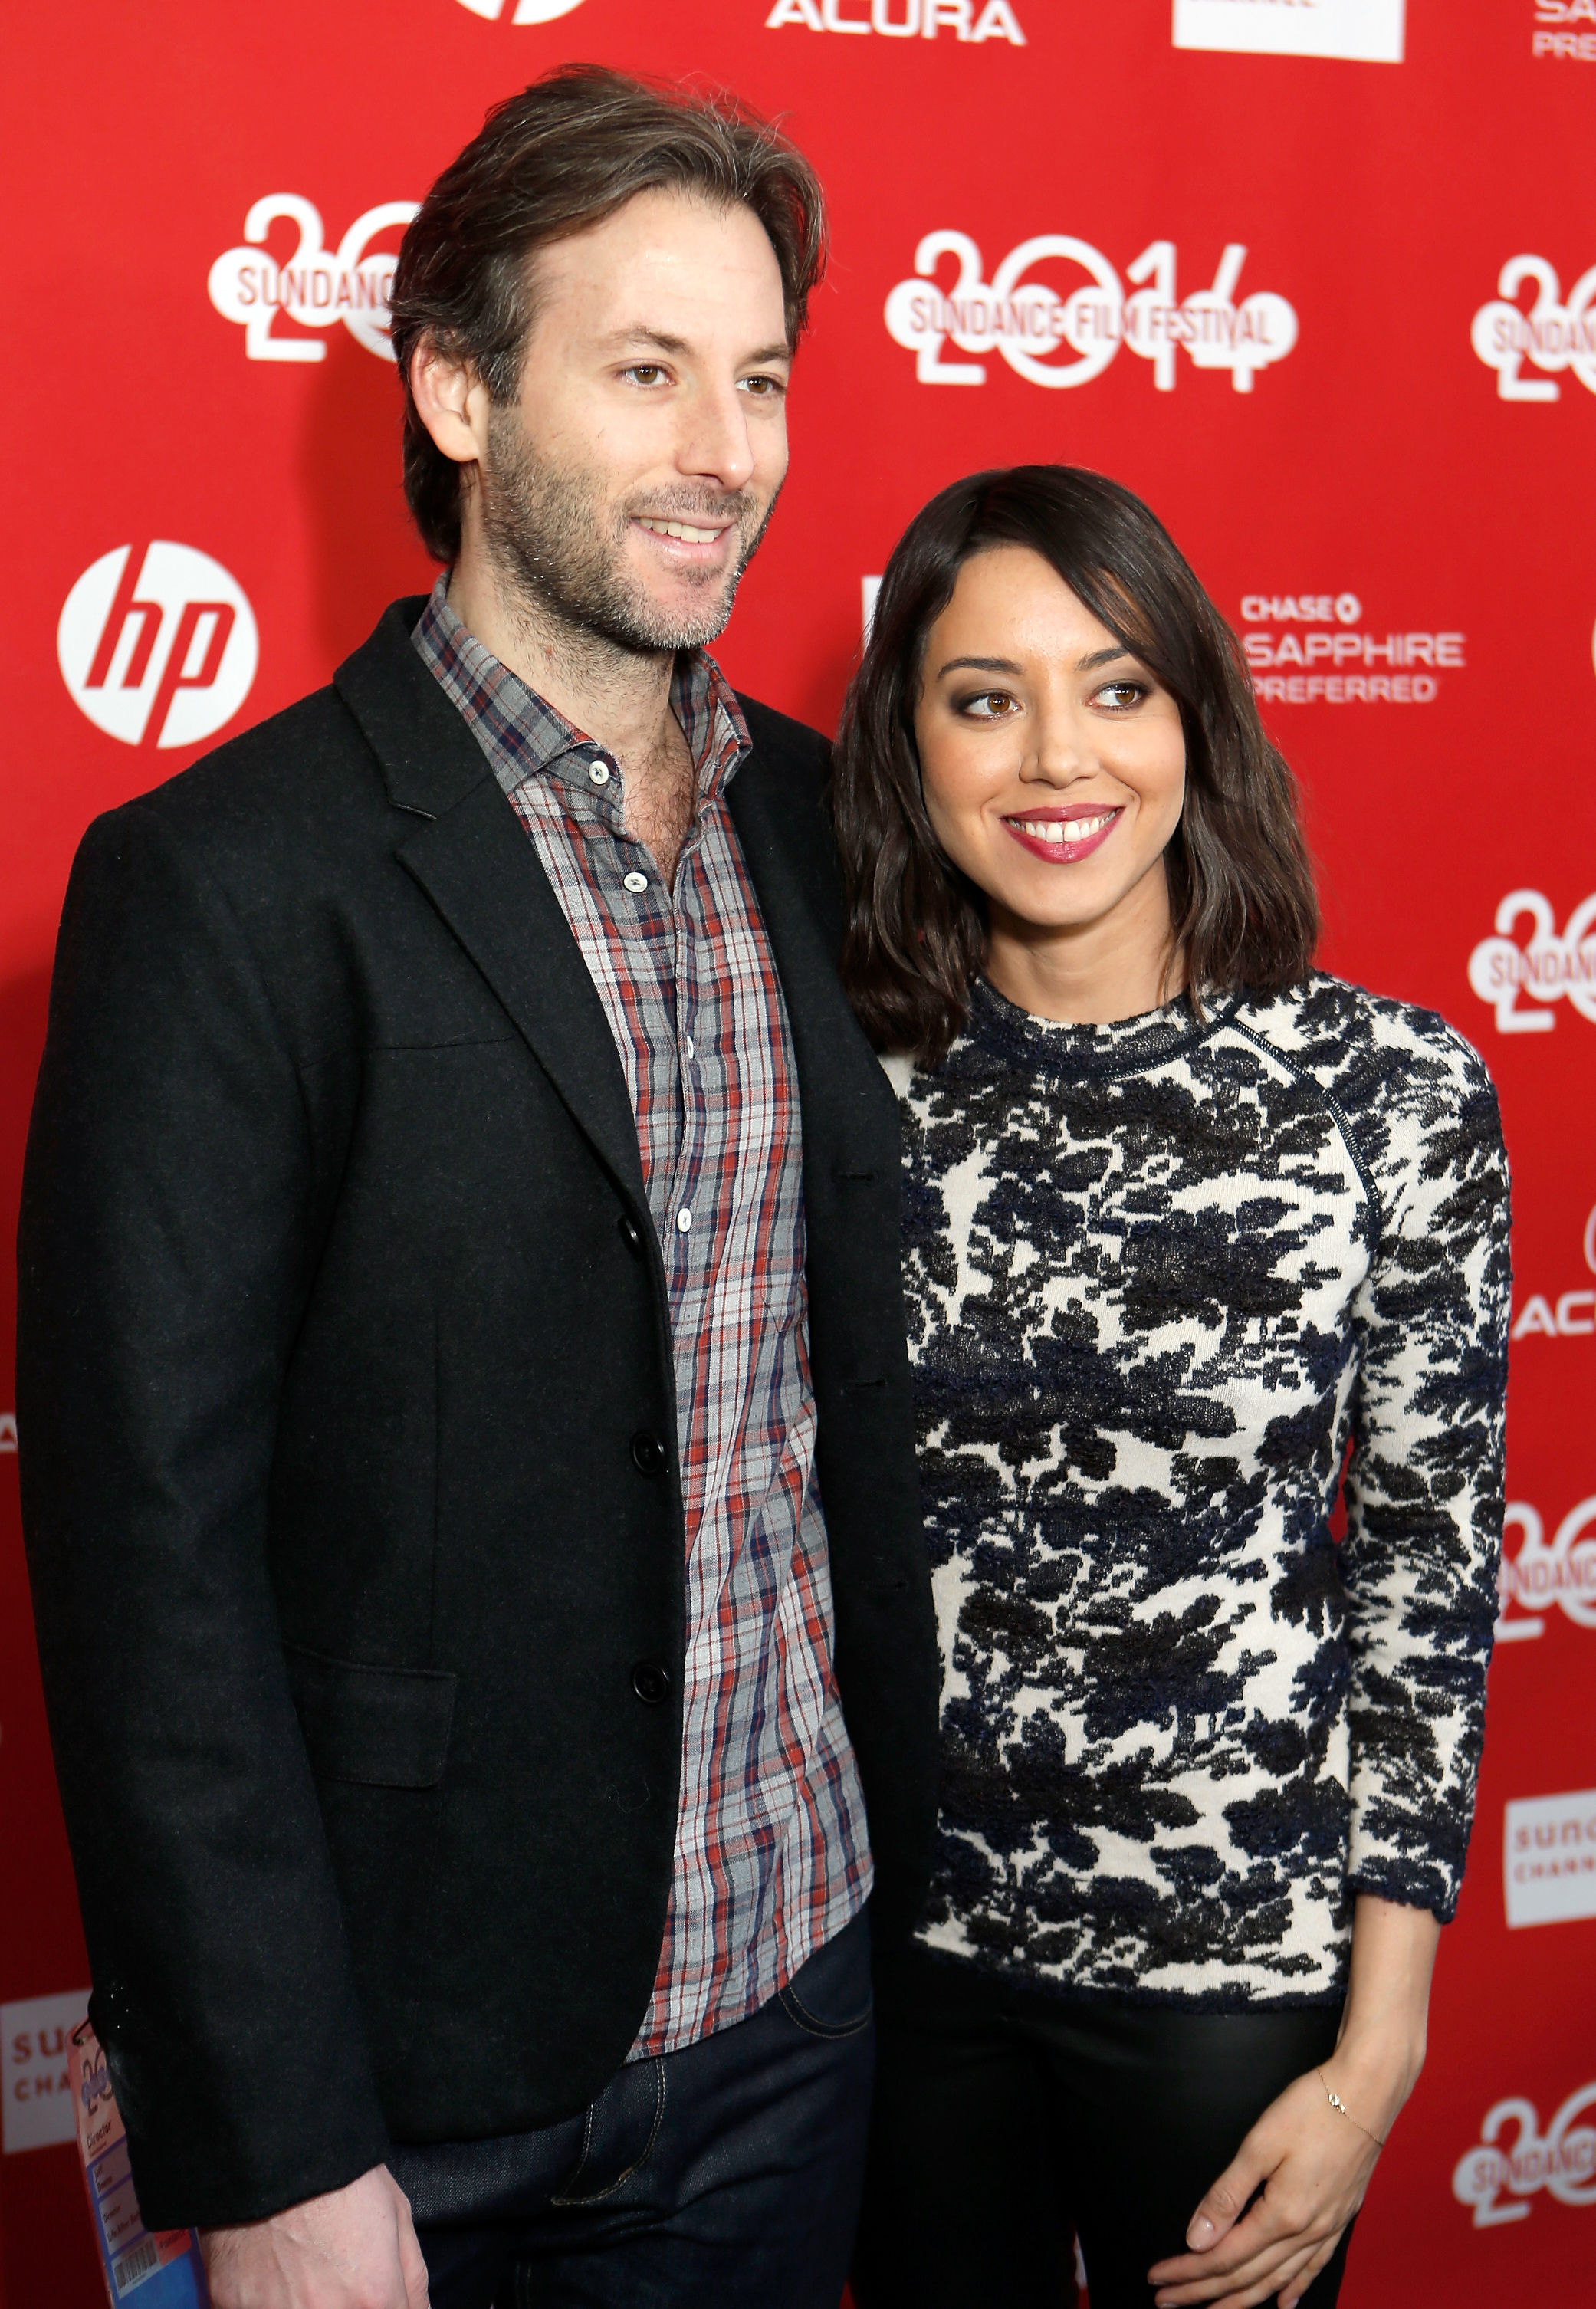 Jeff Baena and Aubrey Plaza at a red carpet event together